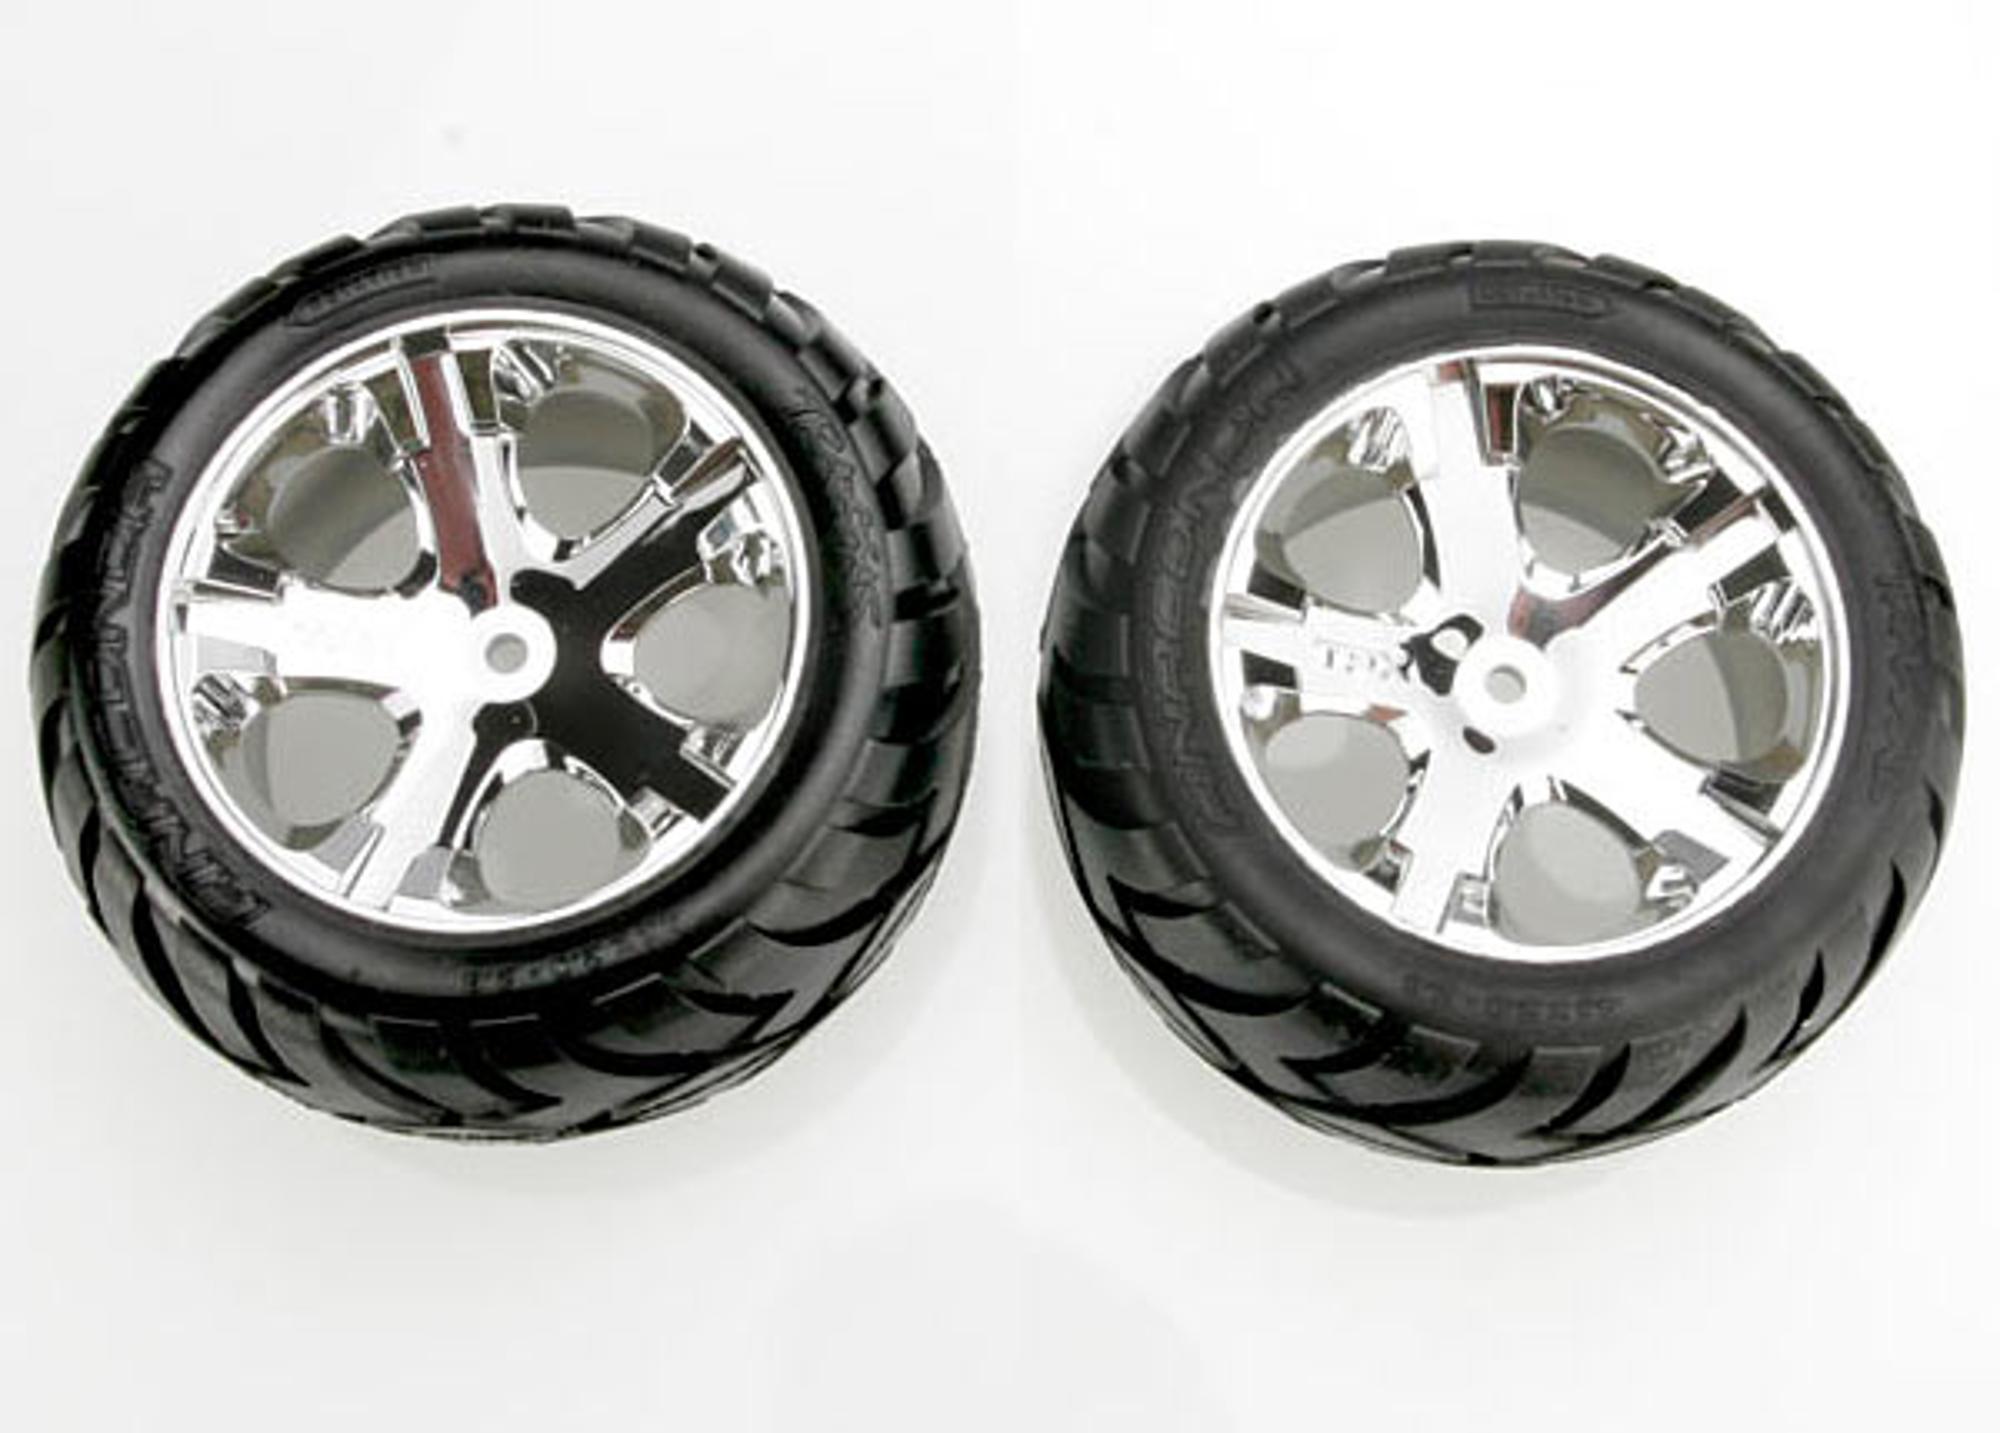 Traxxas All-Star Chrome Wheels and Anaconda Tires w/ Foam Inserts (2WD, Electric Front) (2 pcs)